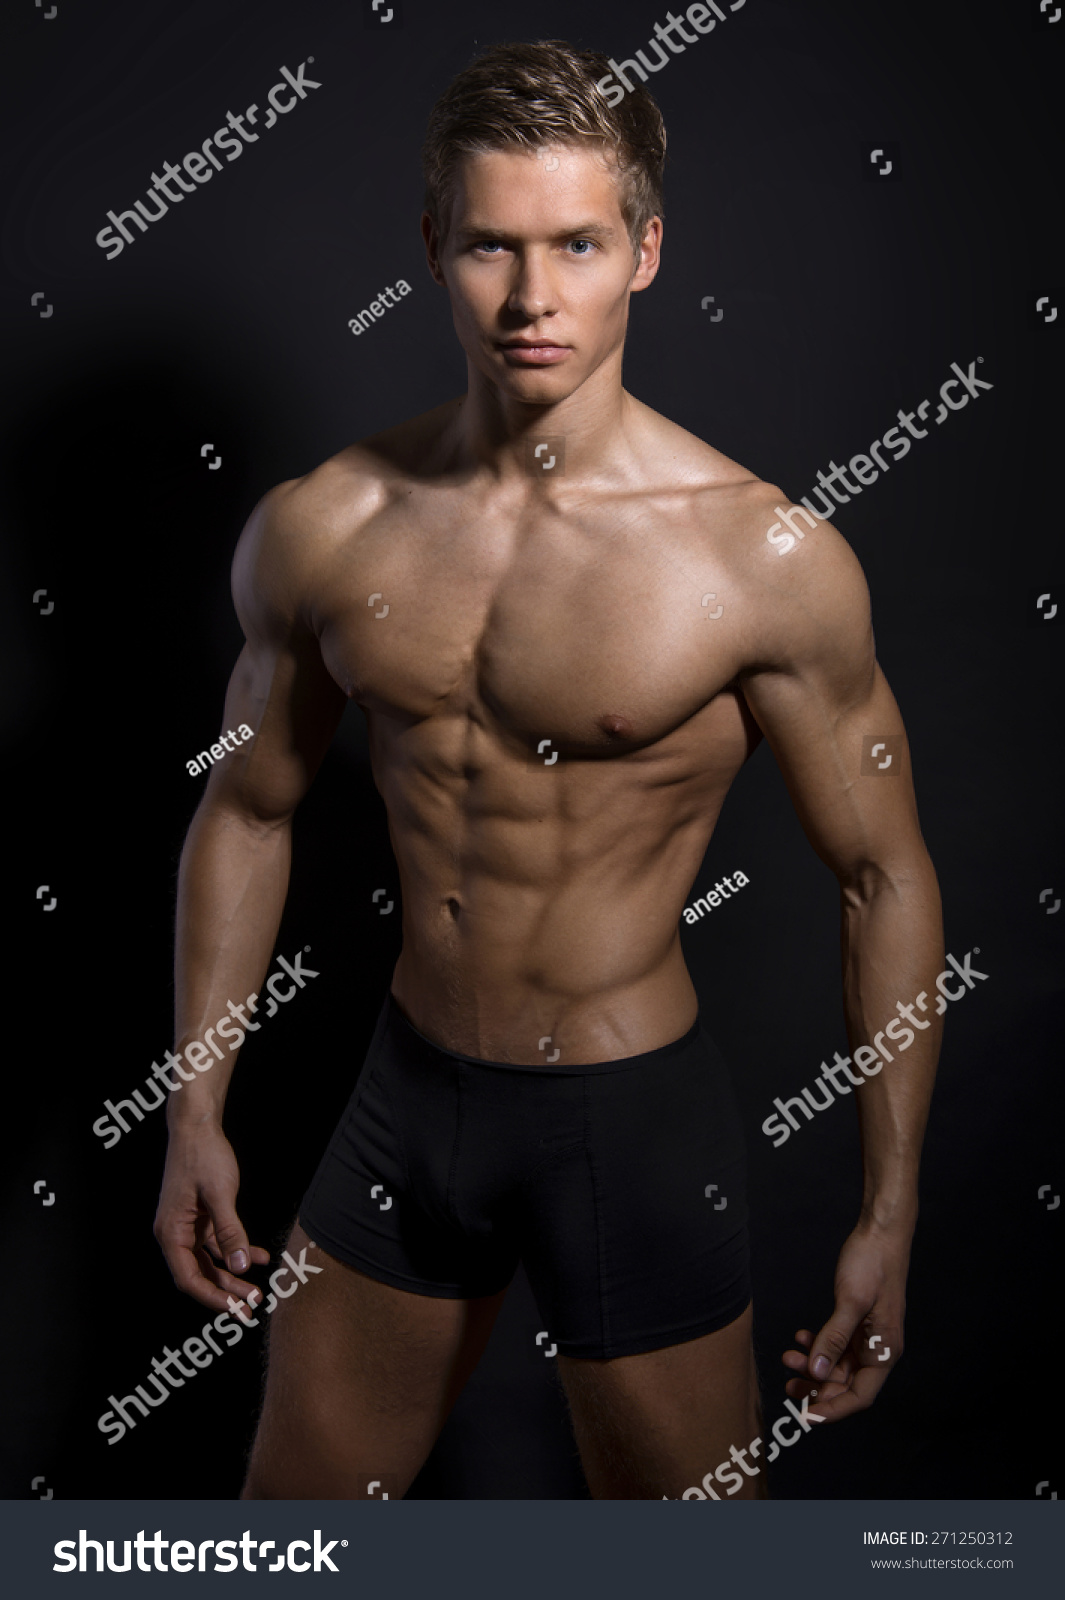 Handsome Bodybuilder Flexing And Shouting Stock Image 